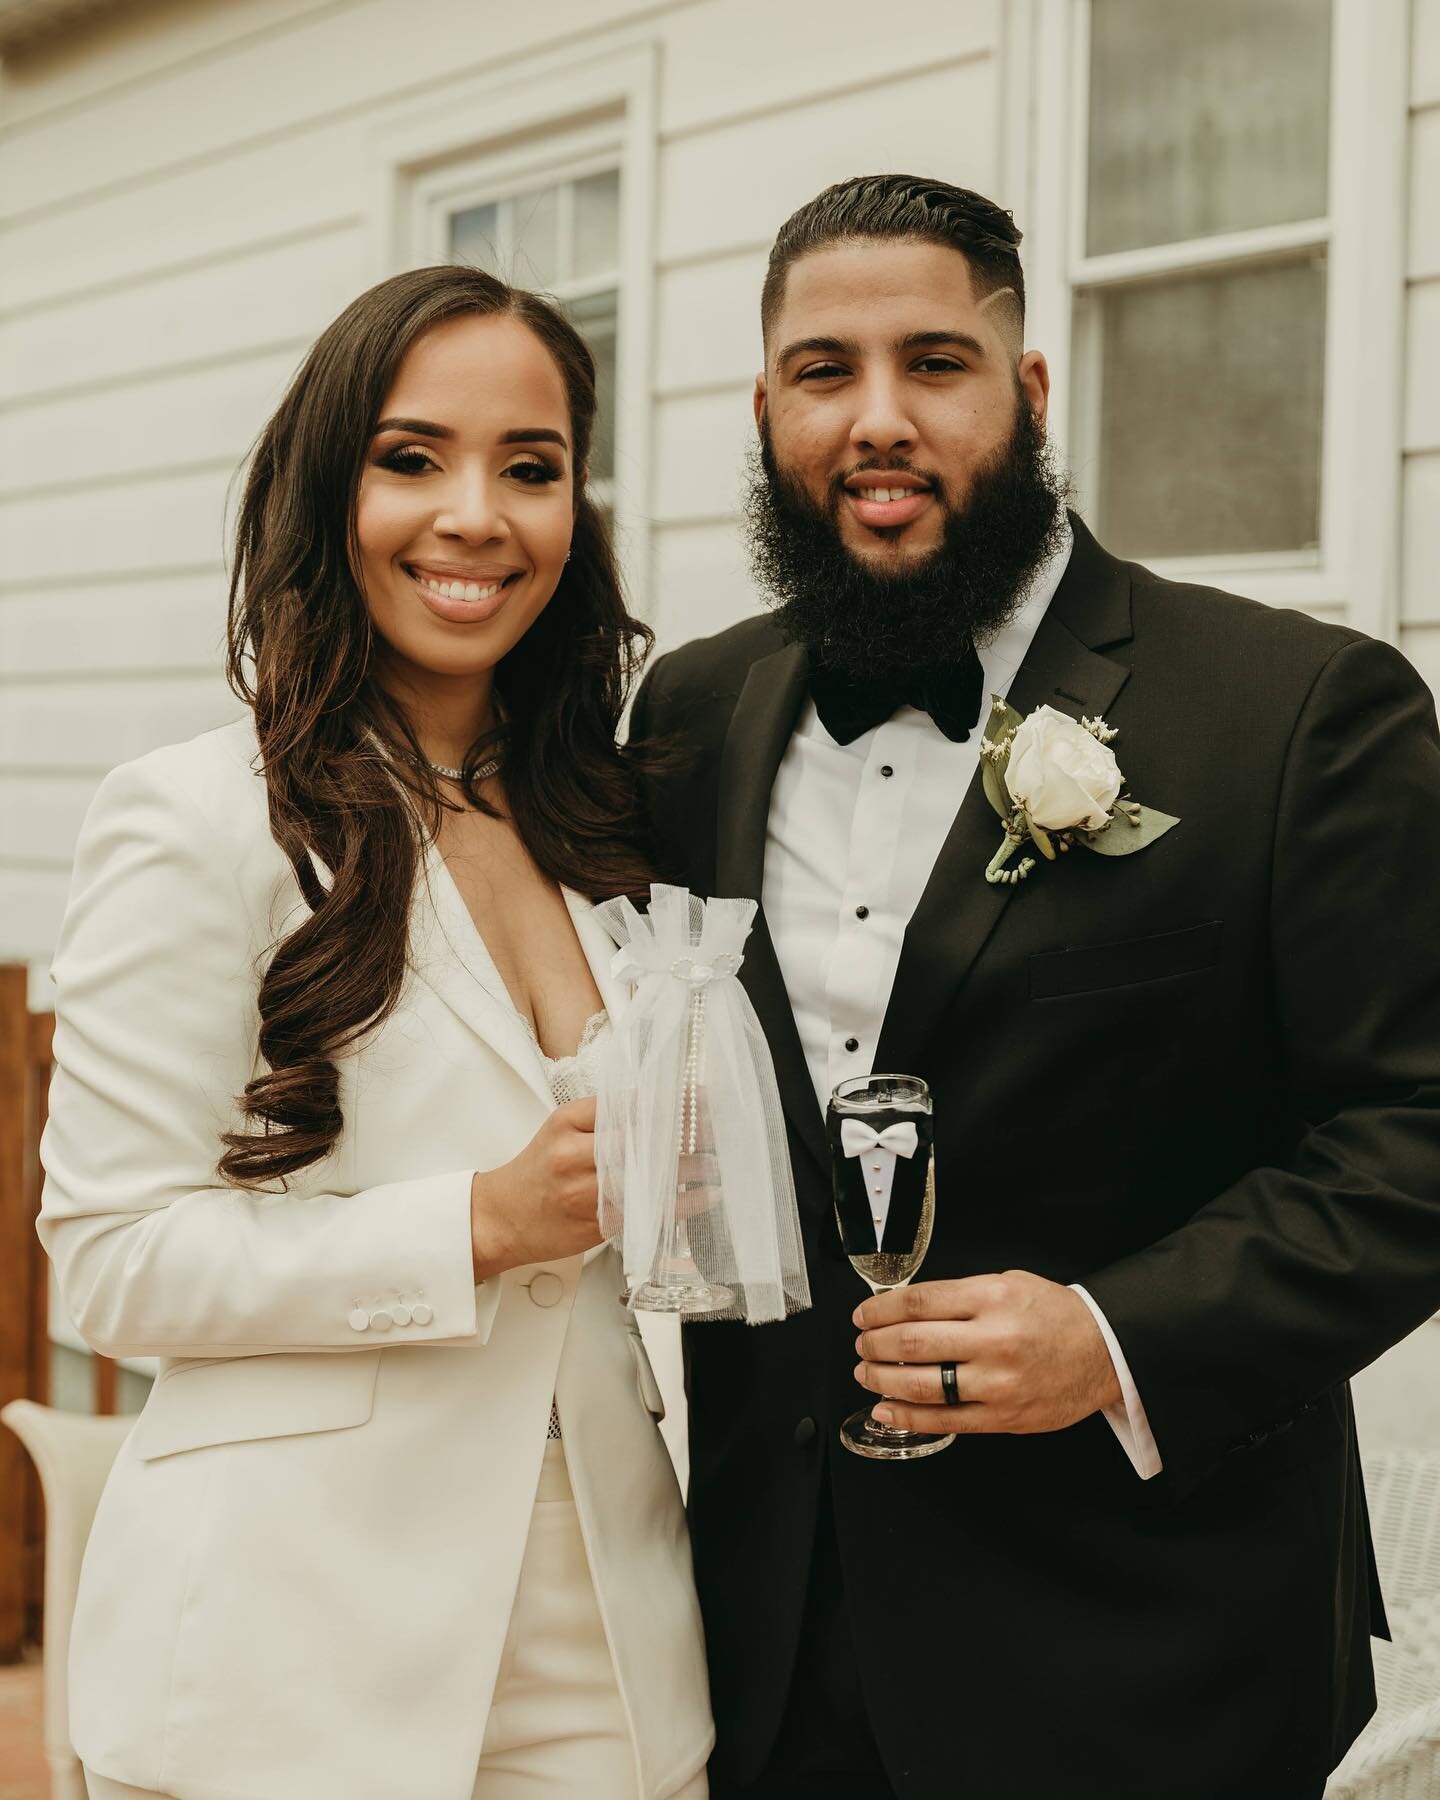 Huge mountains of love go out to Laisa &amp; Martin Perez who eloped at home in New Jersey 2 months ago. (Check out Laisa&rsquo;s hotter than hot white suit!) 

Their wedding was a first for us as we delivered a bi-lingual Spanish ceremony. Dani at @